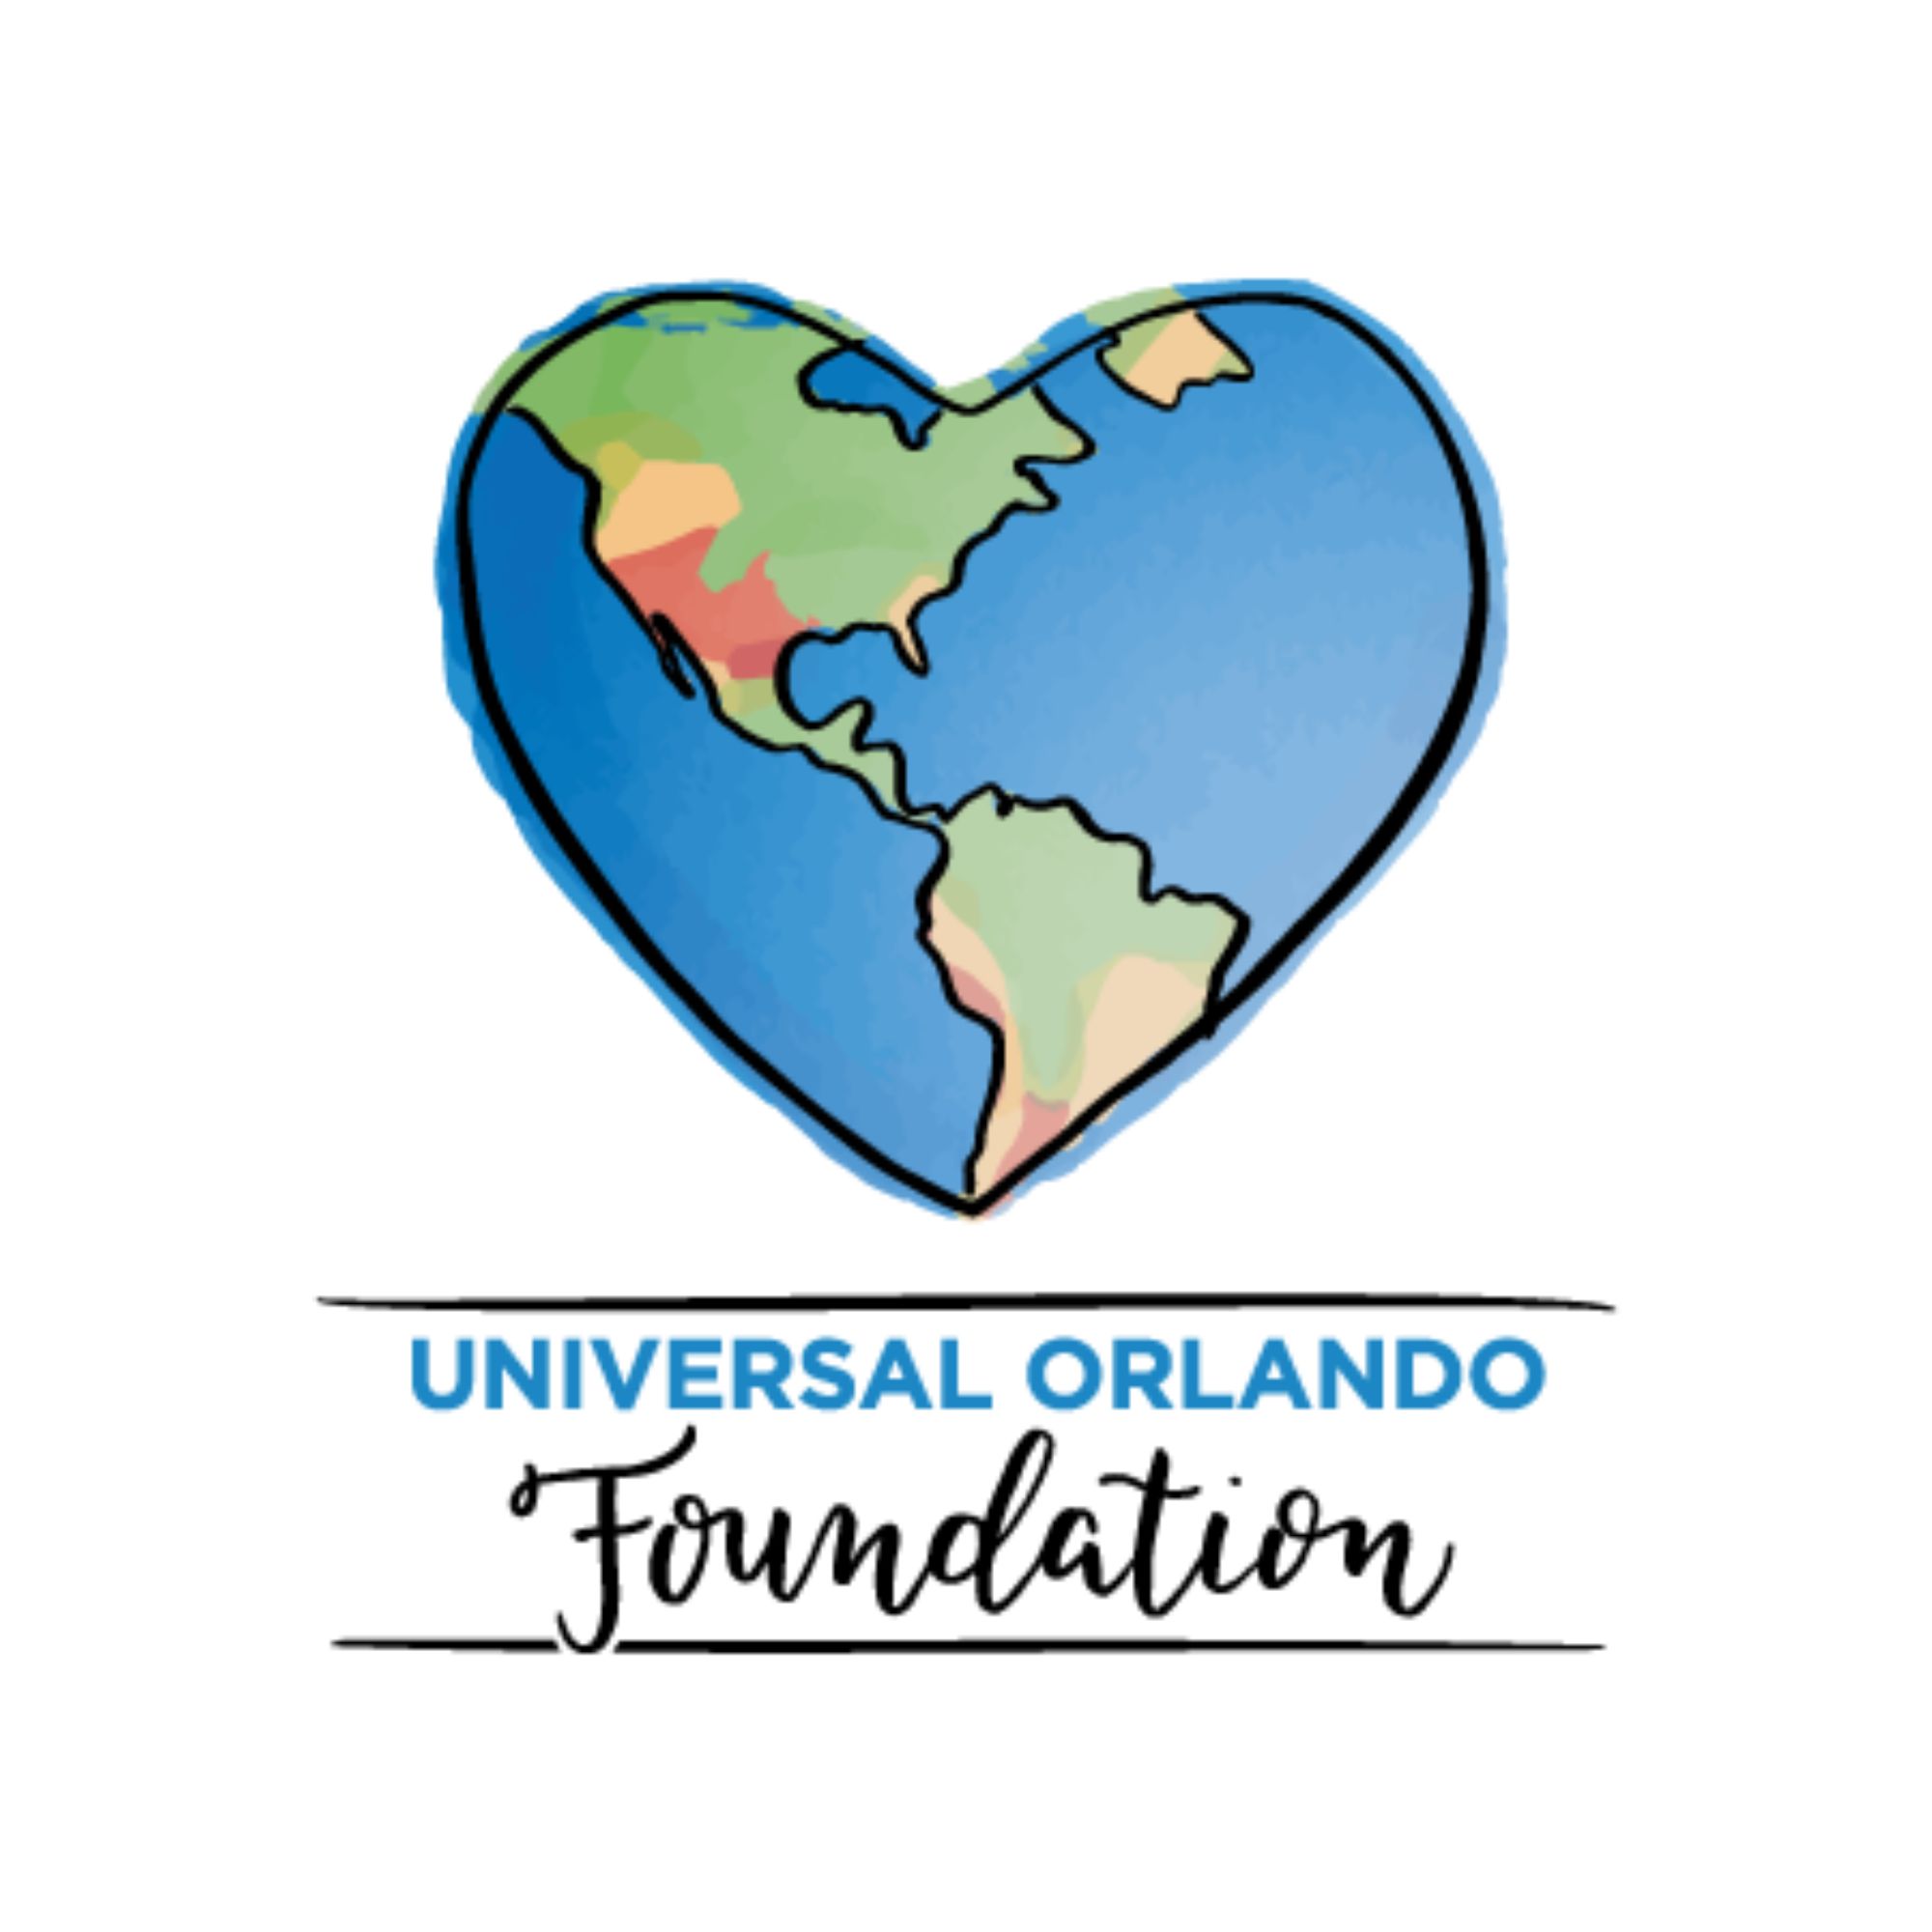 Featured image for “Universal Orlando Foundation”